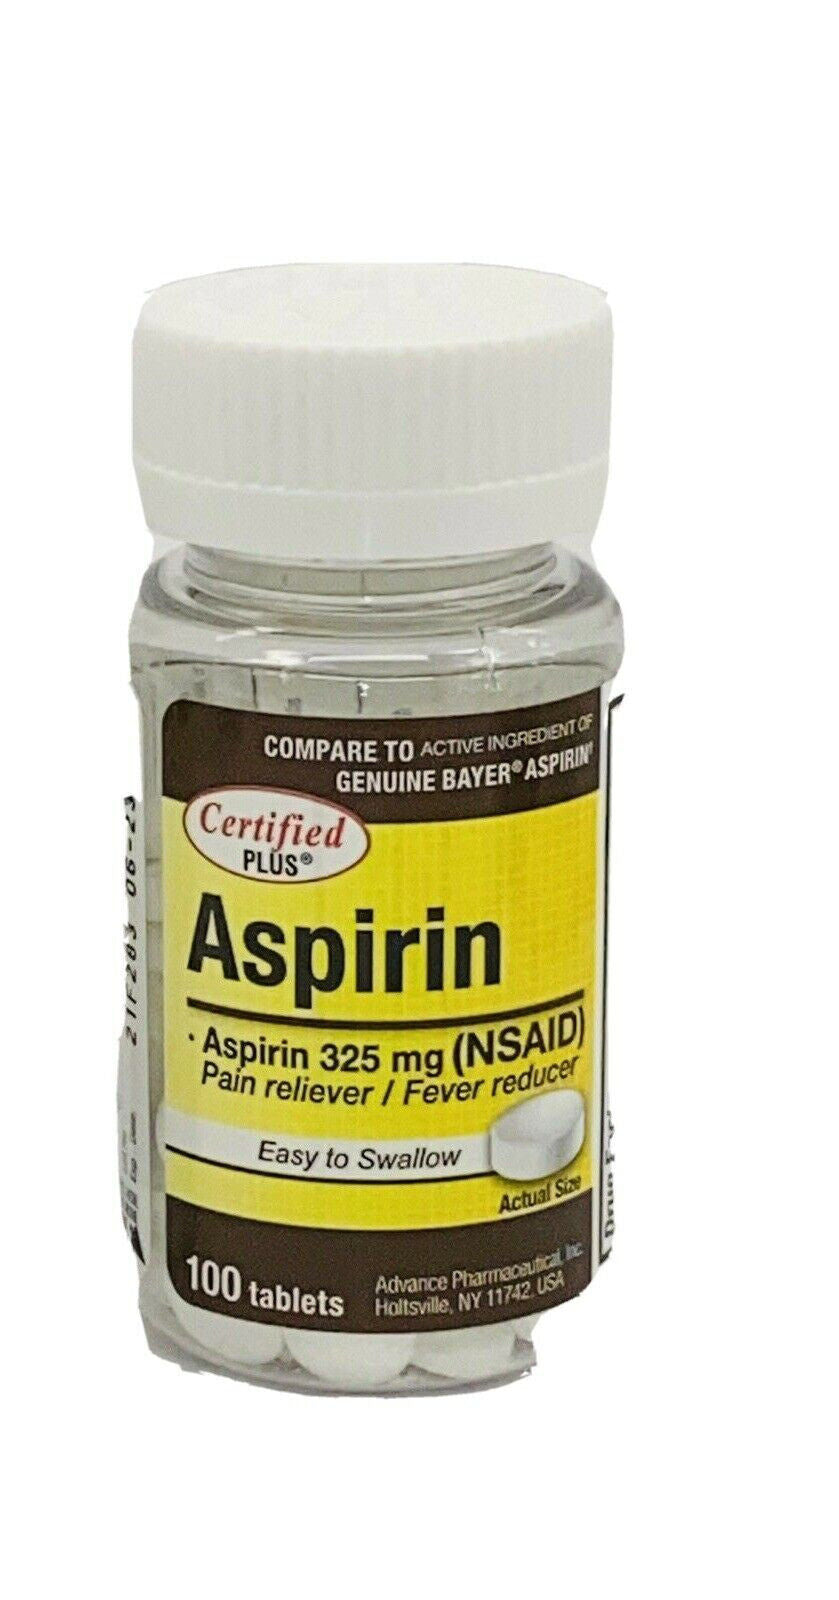 Aspirin (NSAID) Pain Reliever Fever Reducer Tablets 100-Count (325 mg)